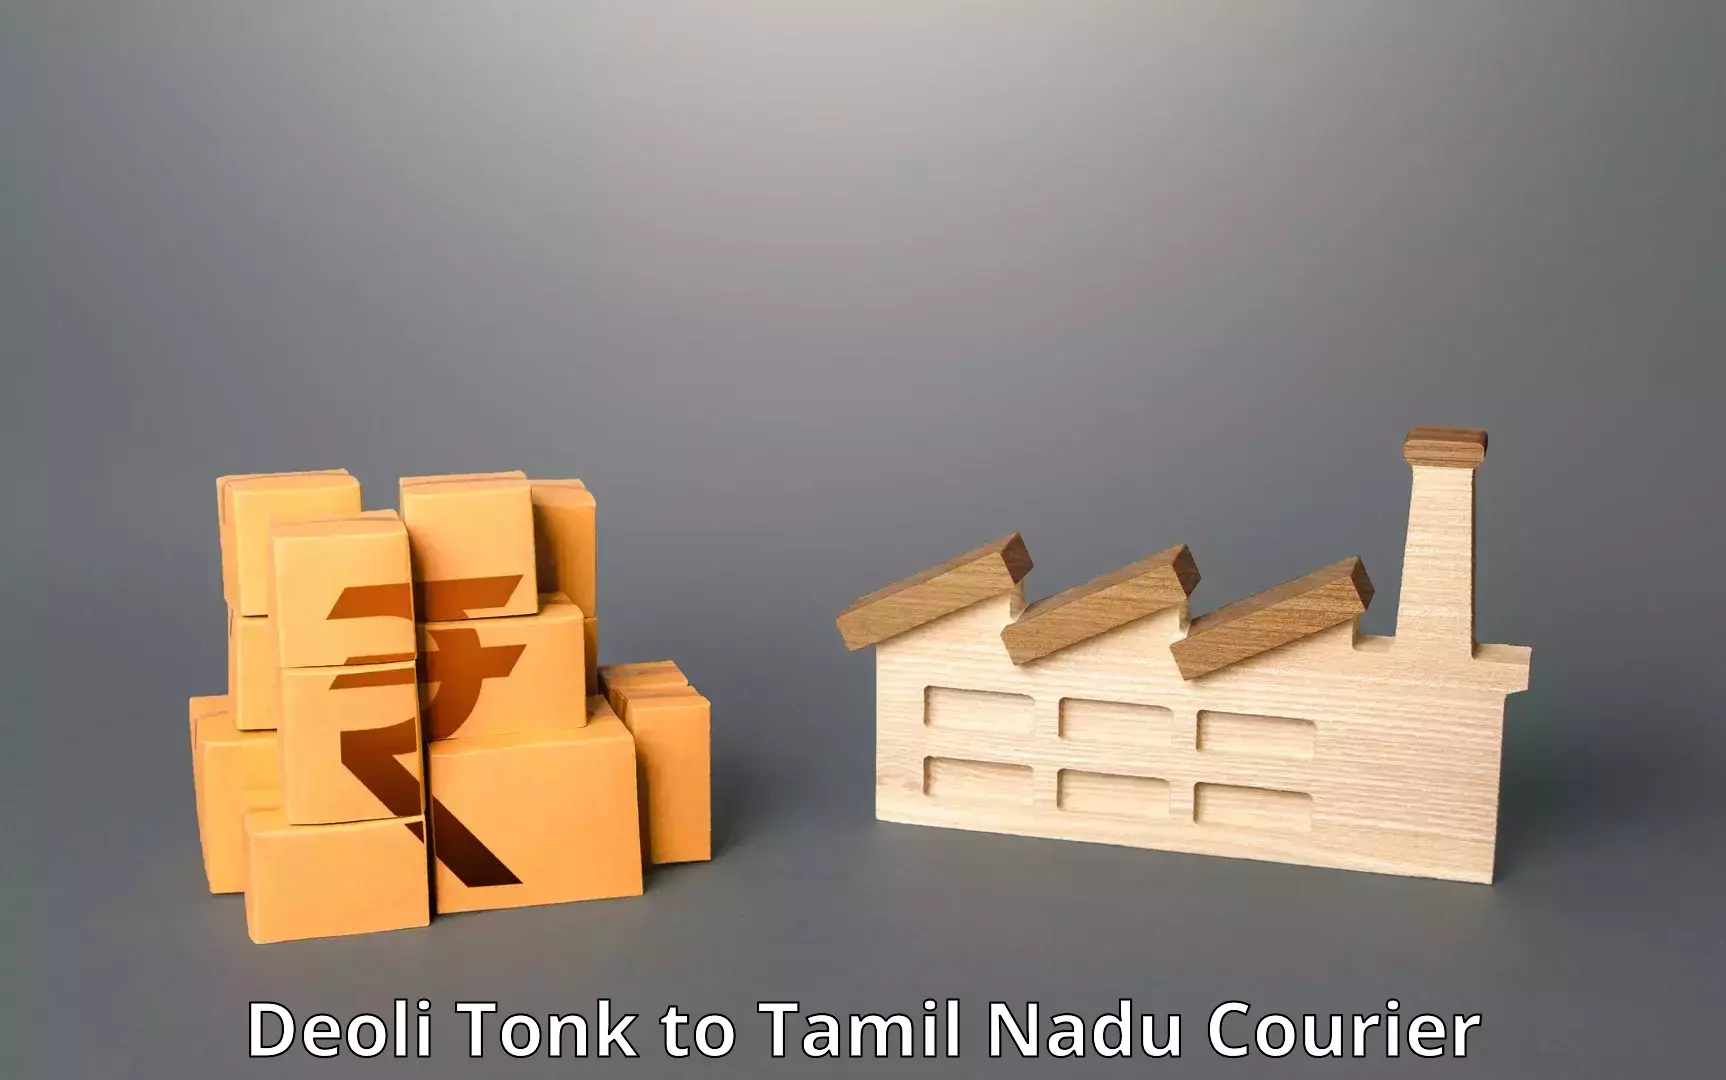 Corporate courier solutions Deoli Tonk to Gummidipoondi